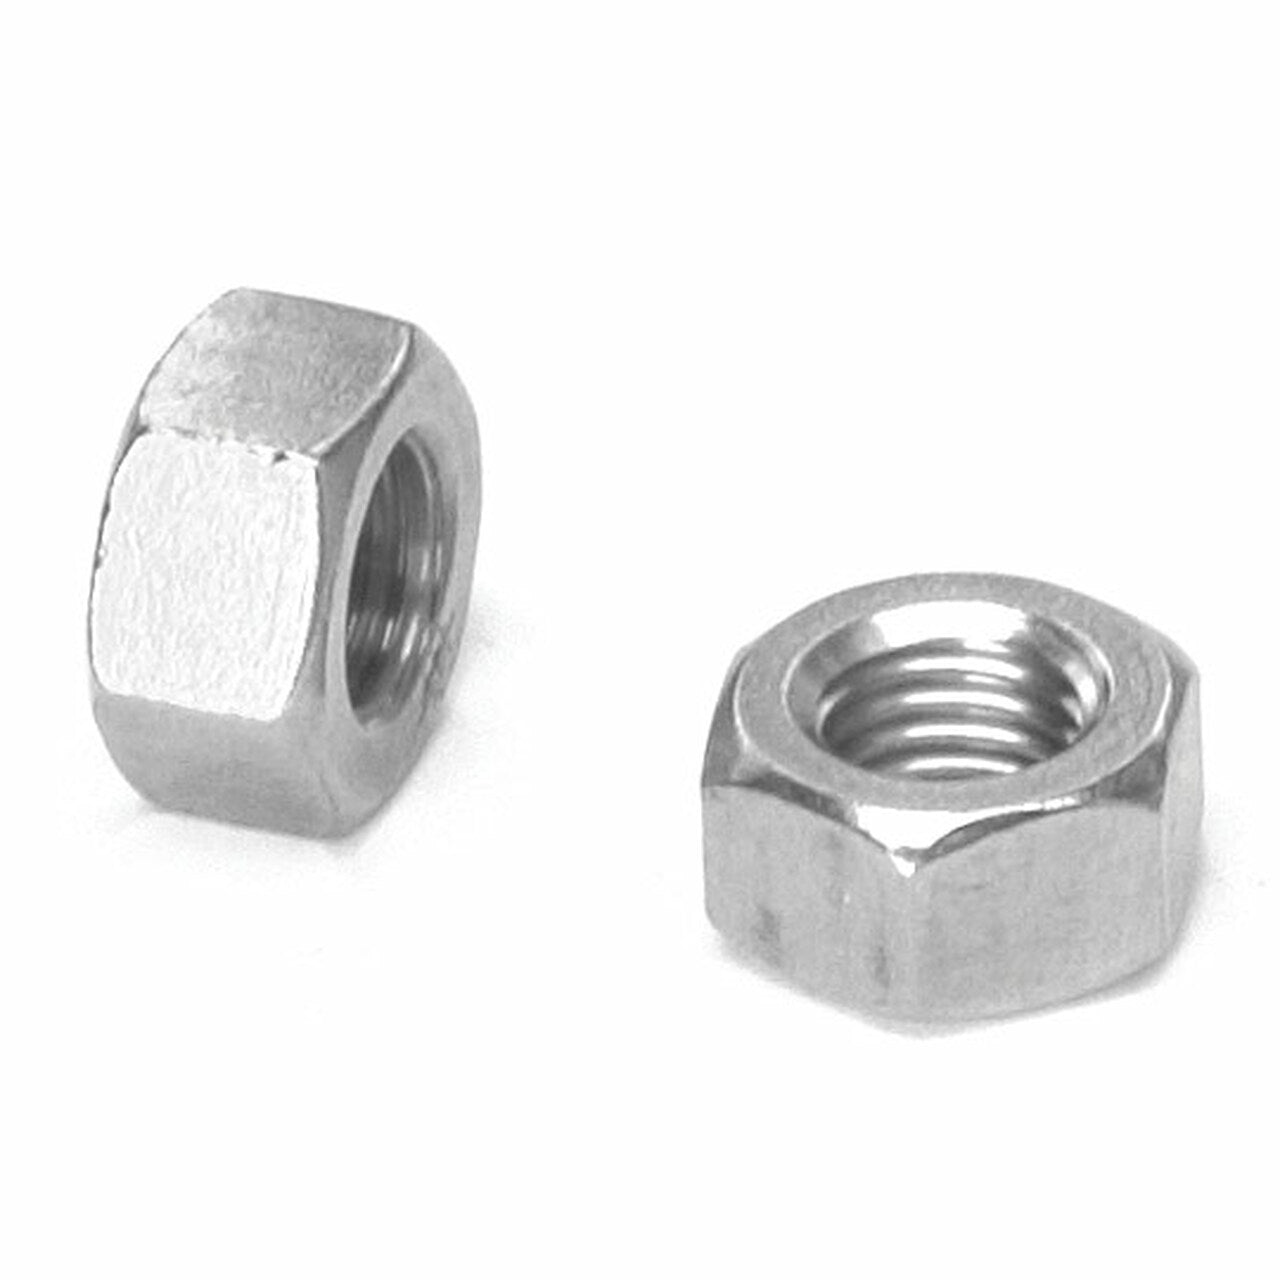 Standard Fasteners - 304 Stainless Steel Nuts, Part No. 5/8-11